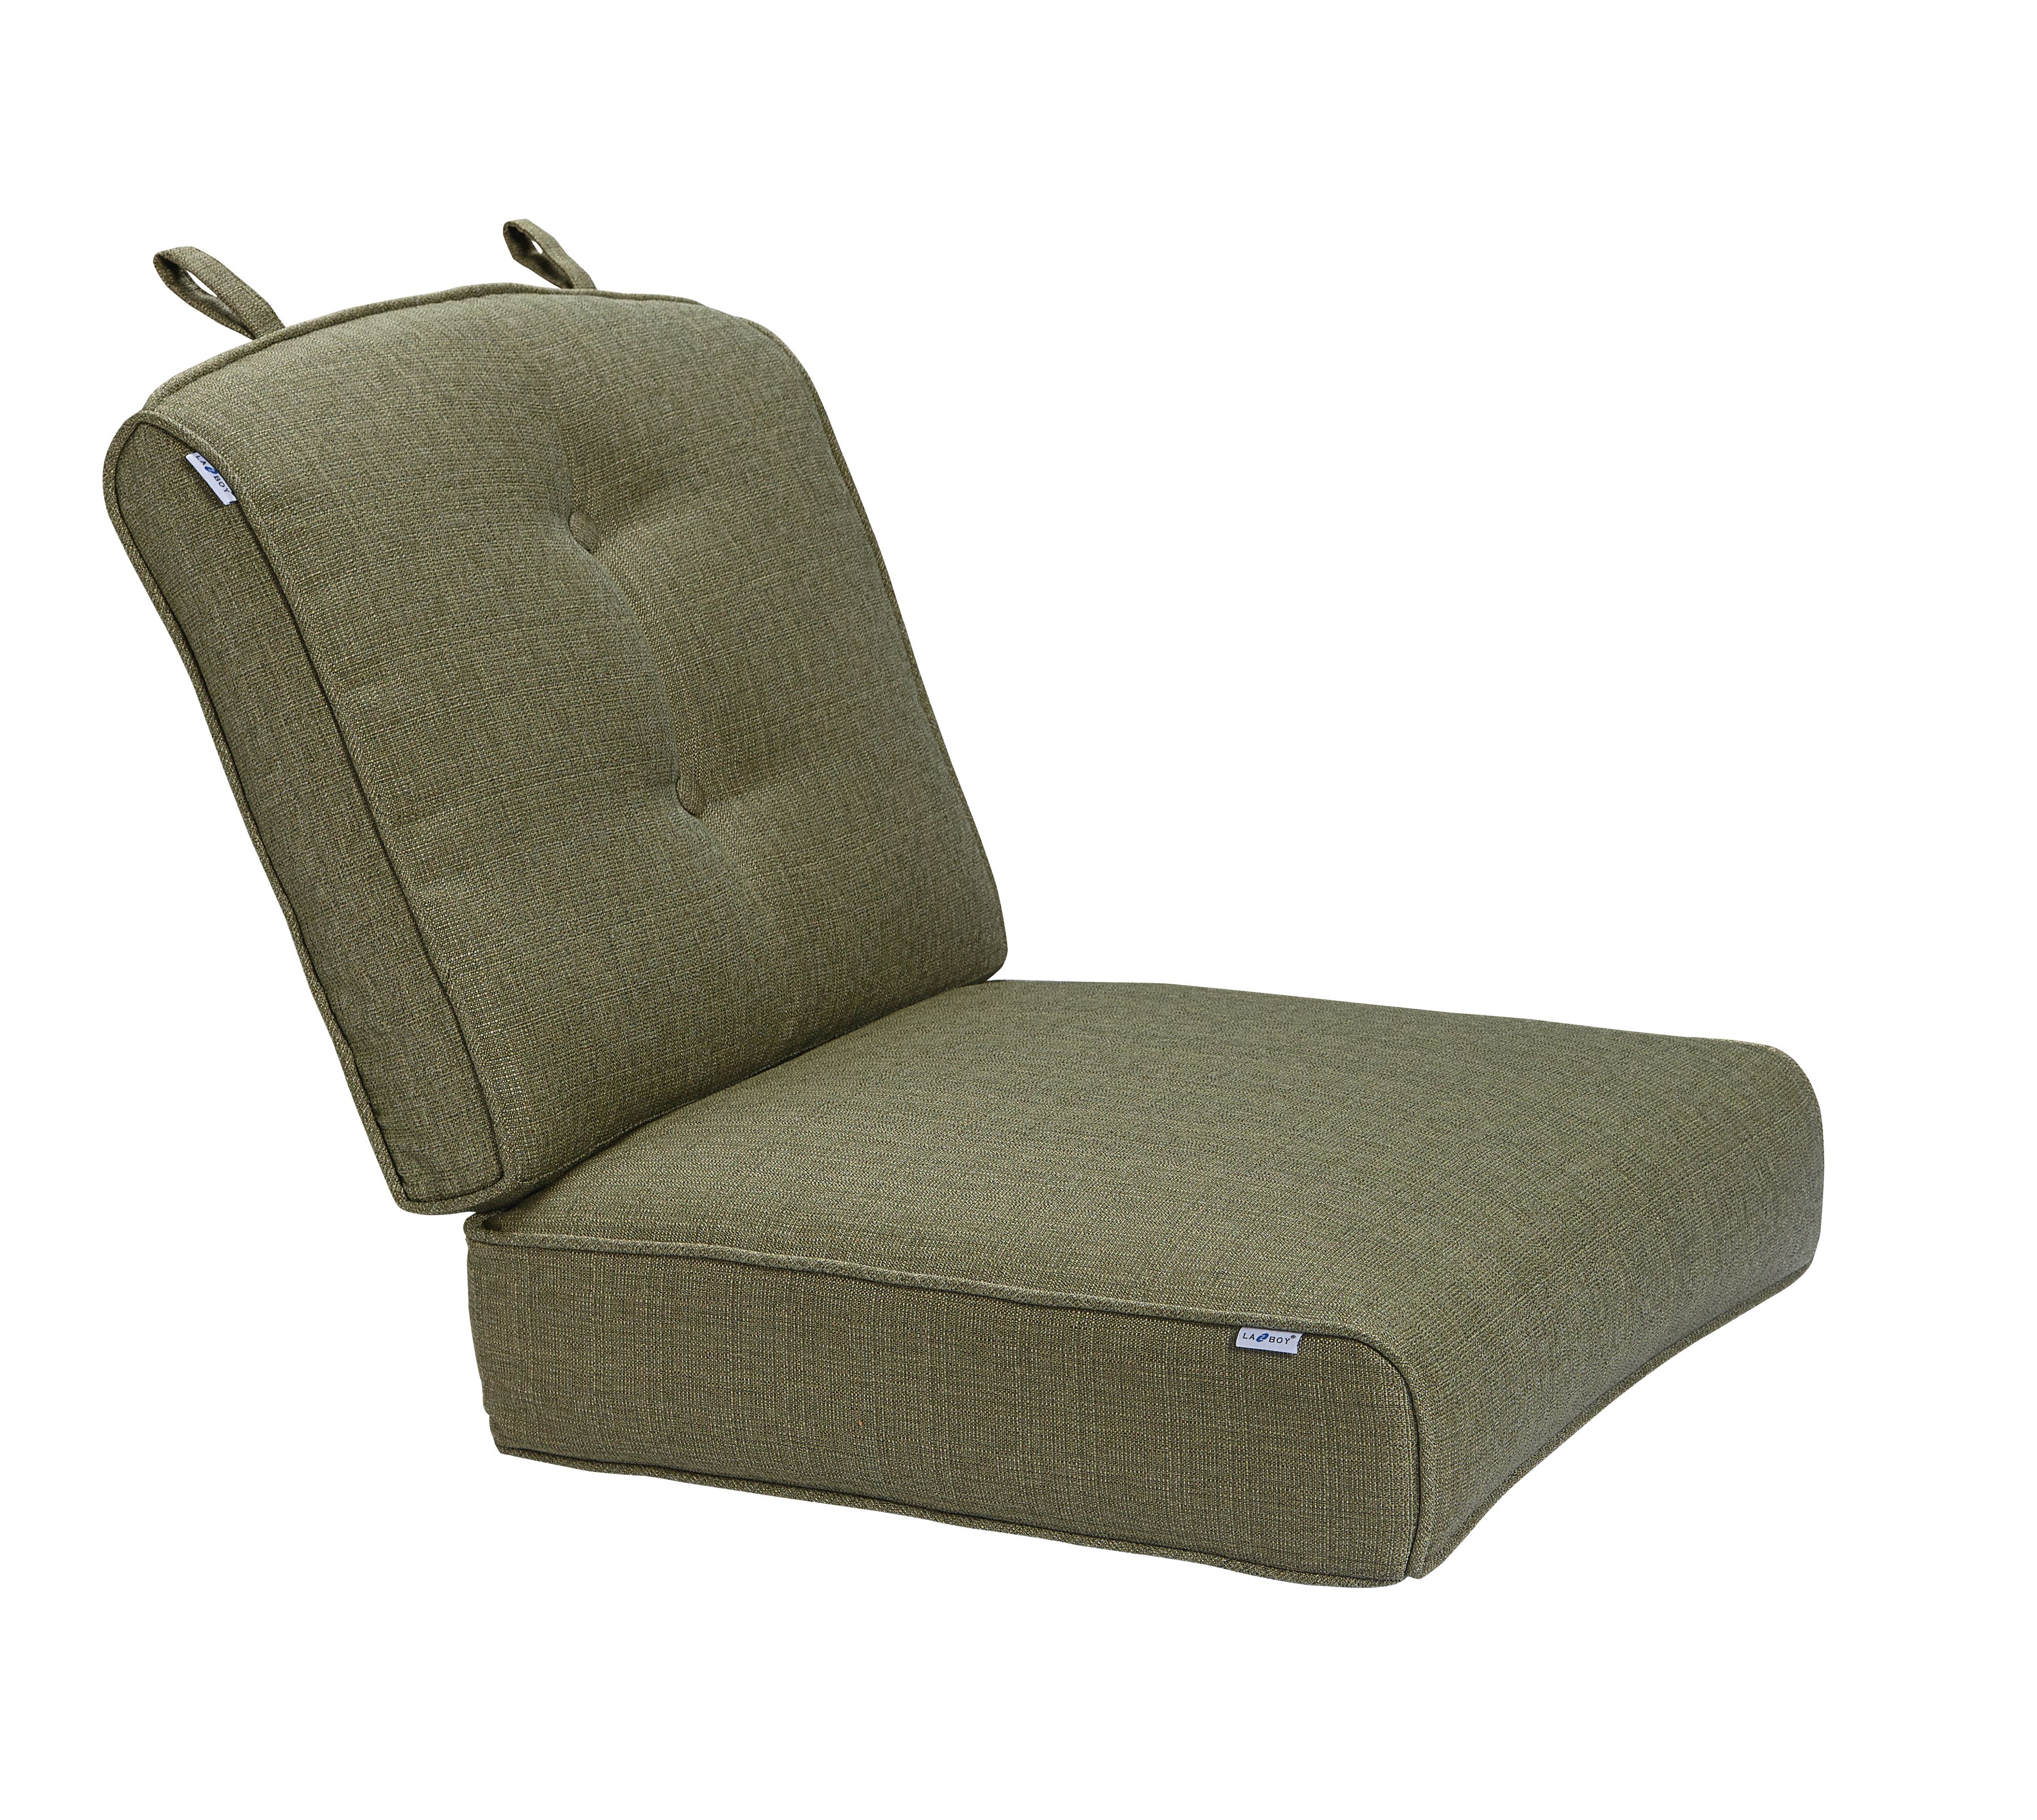 La Z Boy Peyton Replacement Seating, Where To Get Replacement Cushions For Outdoor Furniture